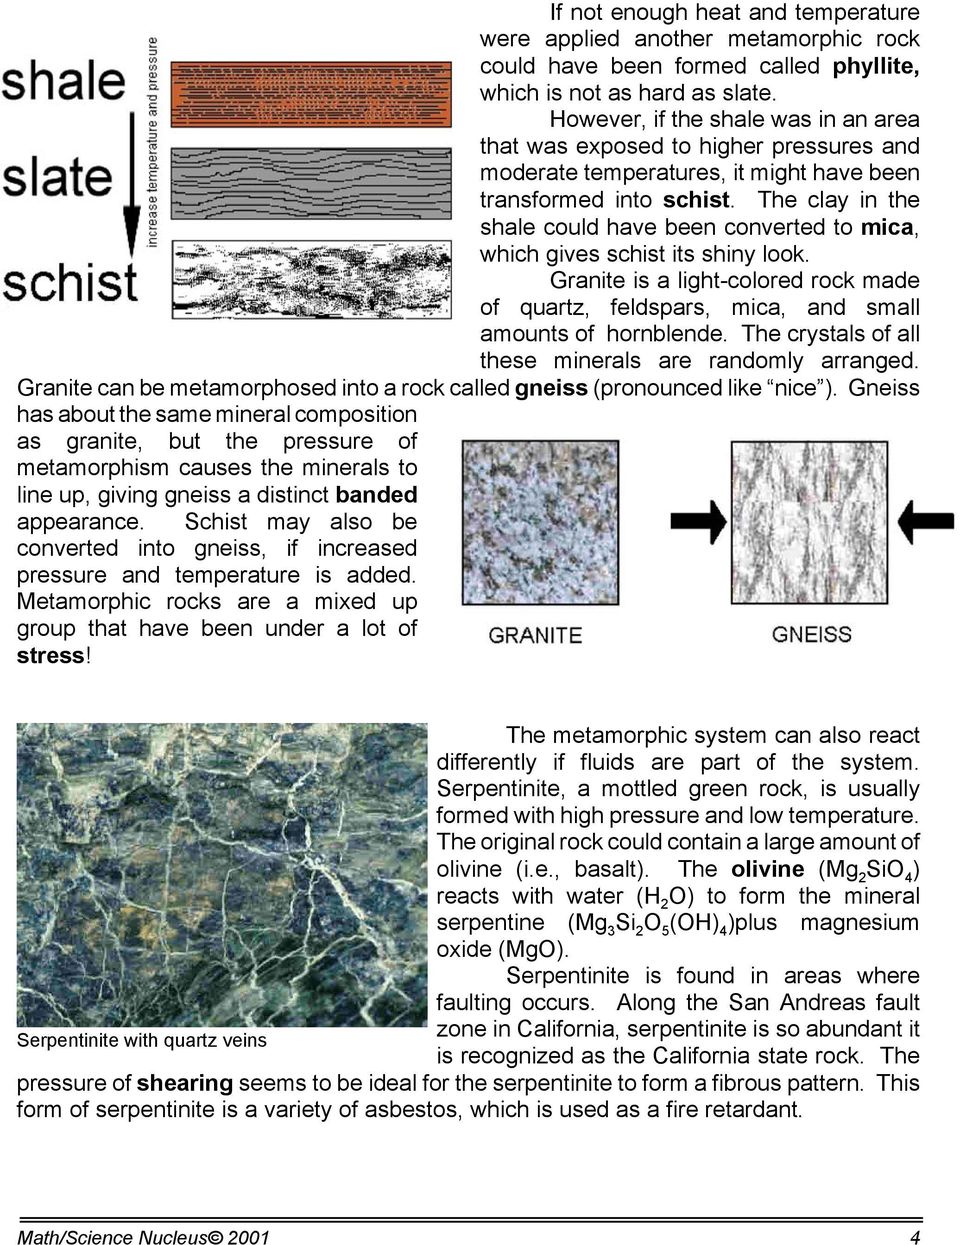 The clay in the shale could have been converted to mica, which gives schist its shiny look. Granite is a light-colored rock made of quartz, feldspars, mica, and small amounts of hornblende.